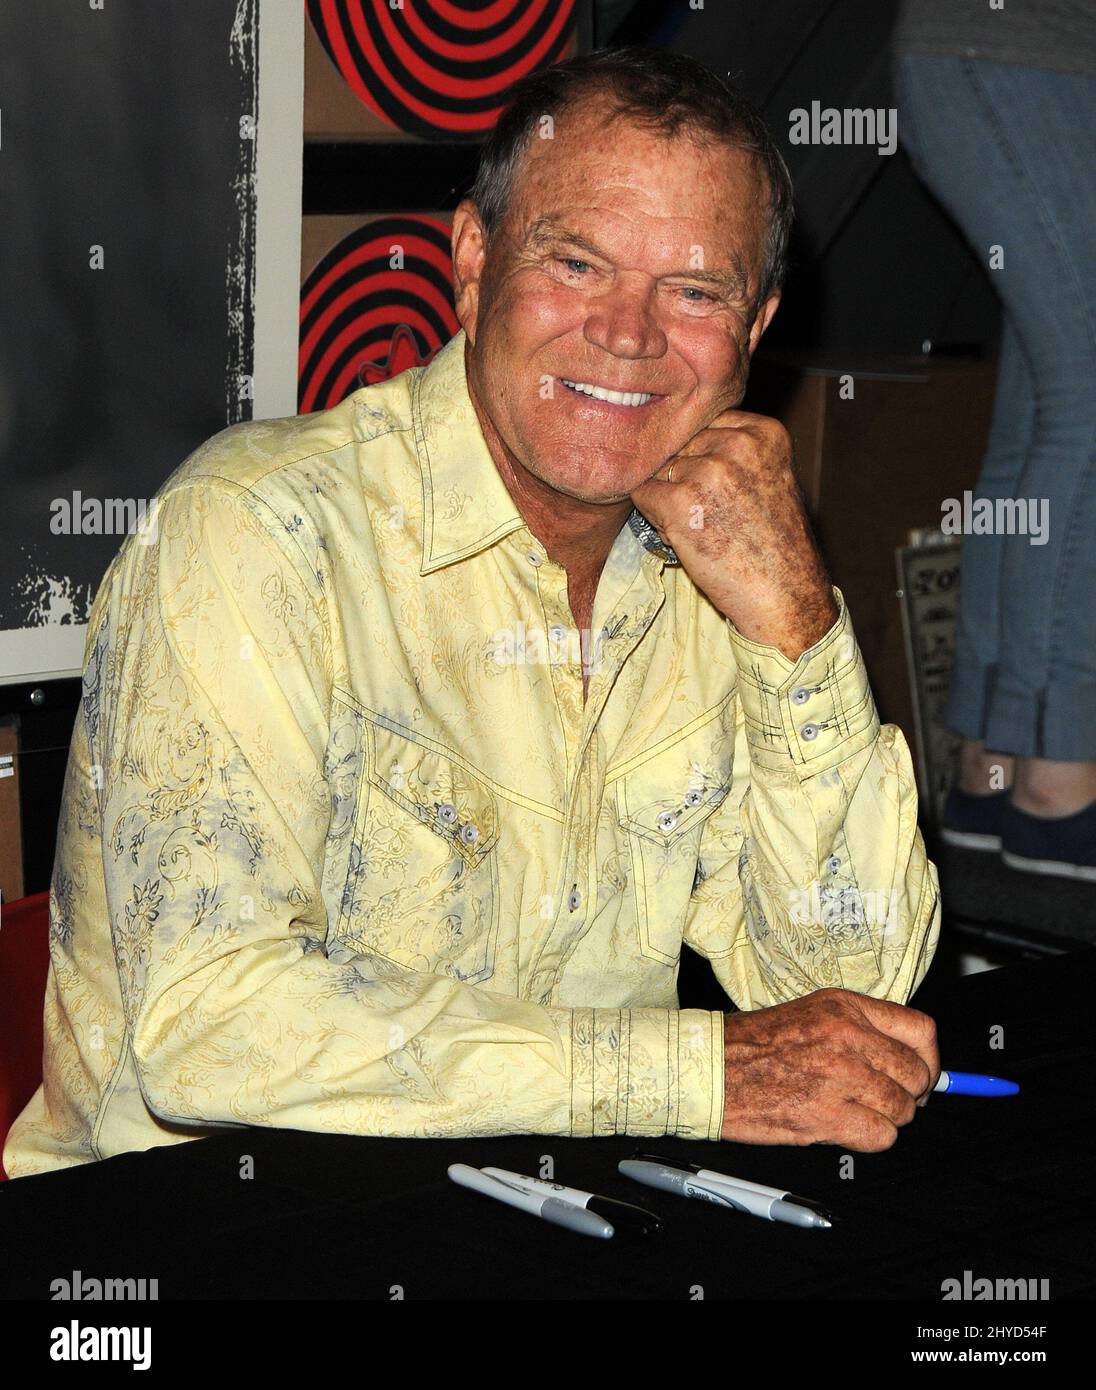 6 septembre 2011 Hollywood, ca. Glen Campbell Glen Campbell 'Ghost on the Canvas' CD de signature à Amoeba Music Banque D'Images